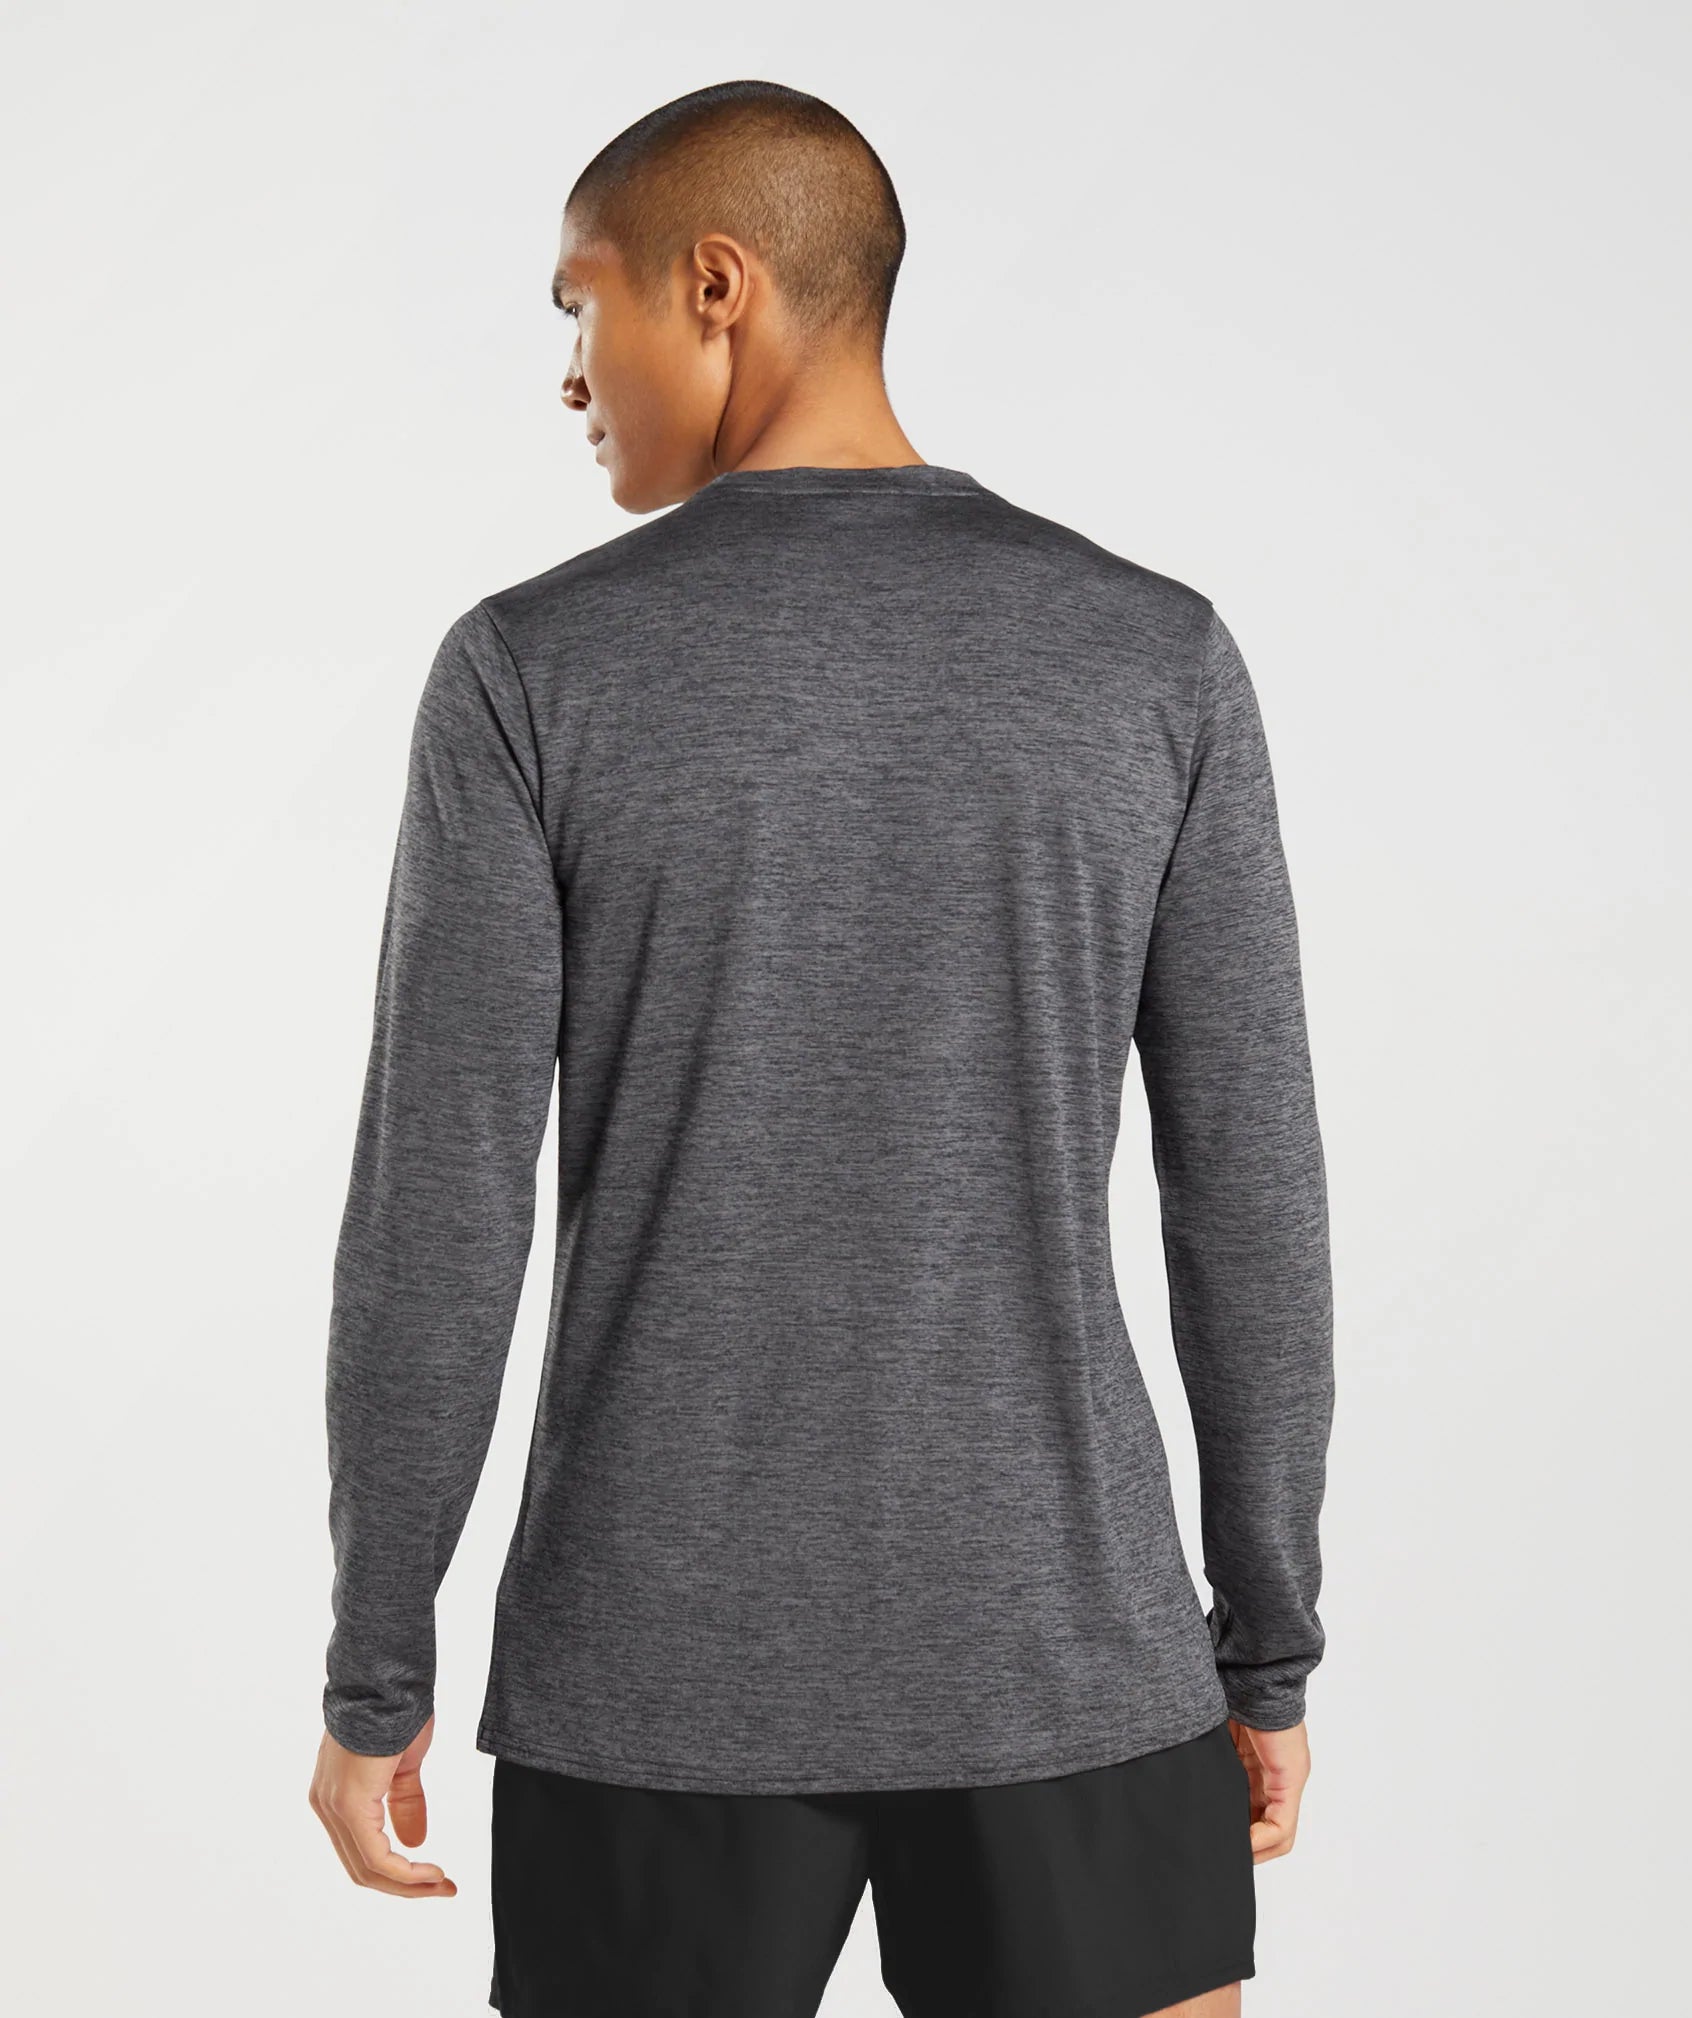 Arrival Long Sleeve T-Shirt in Black/Silhouette Grey Marl